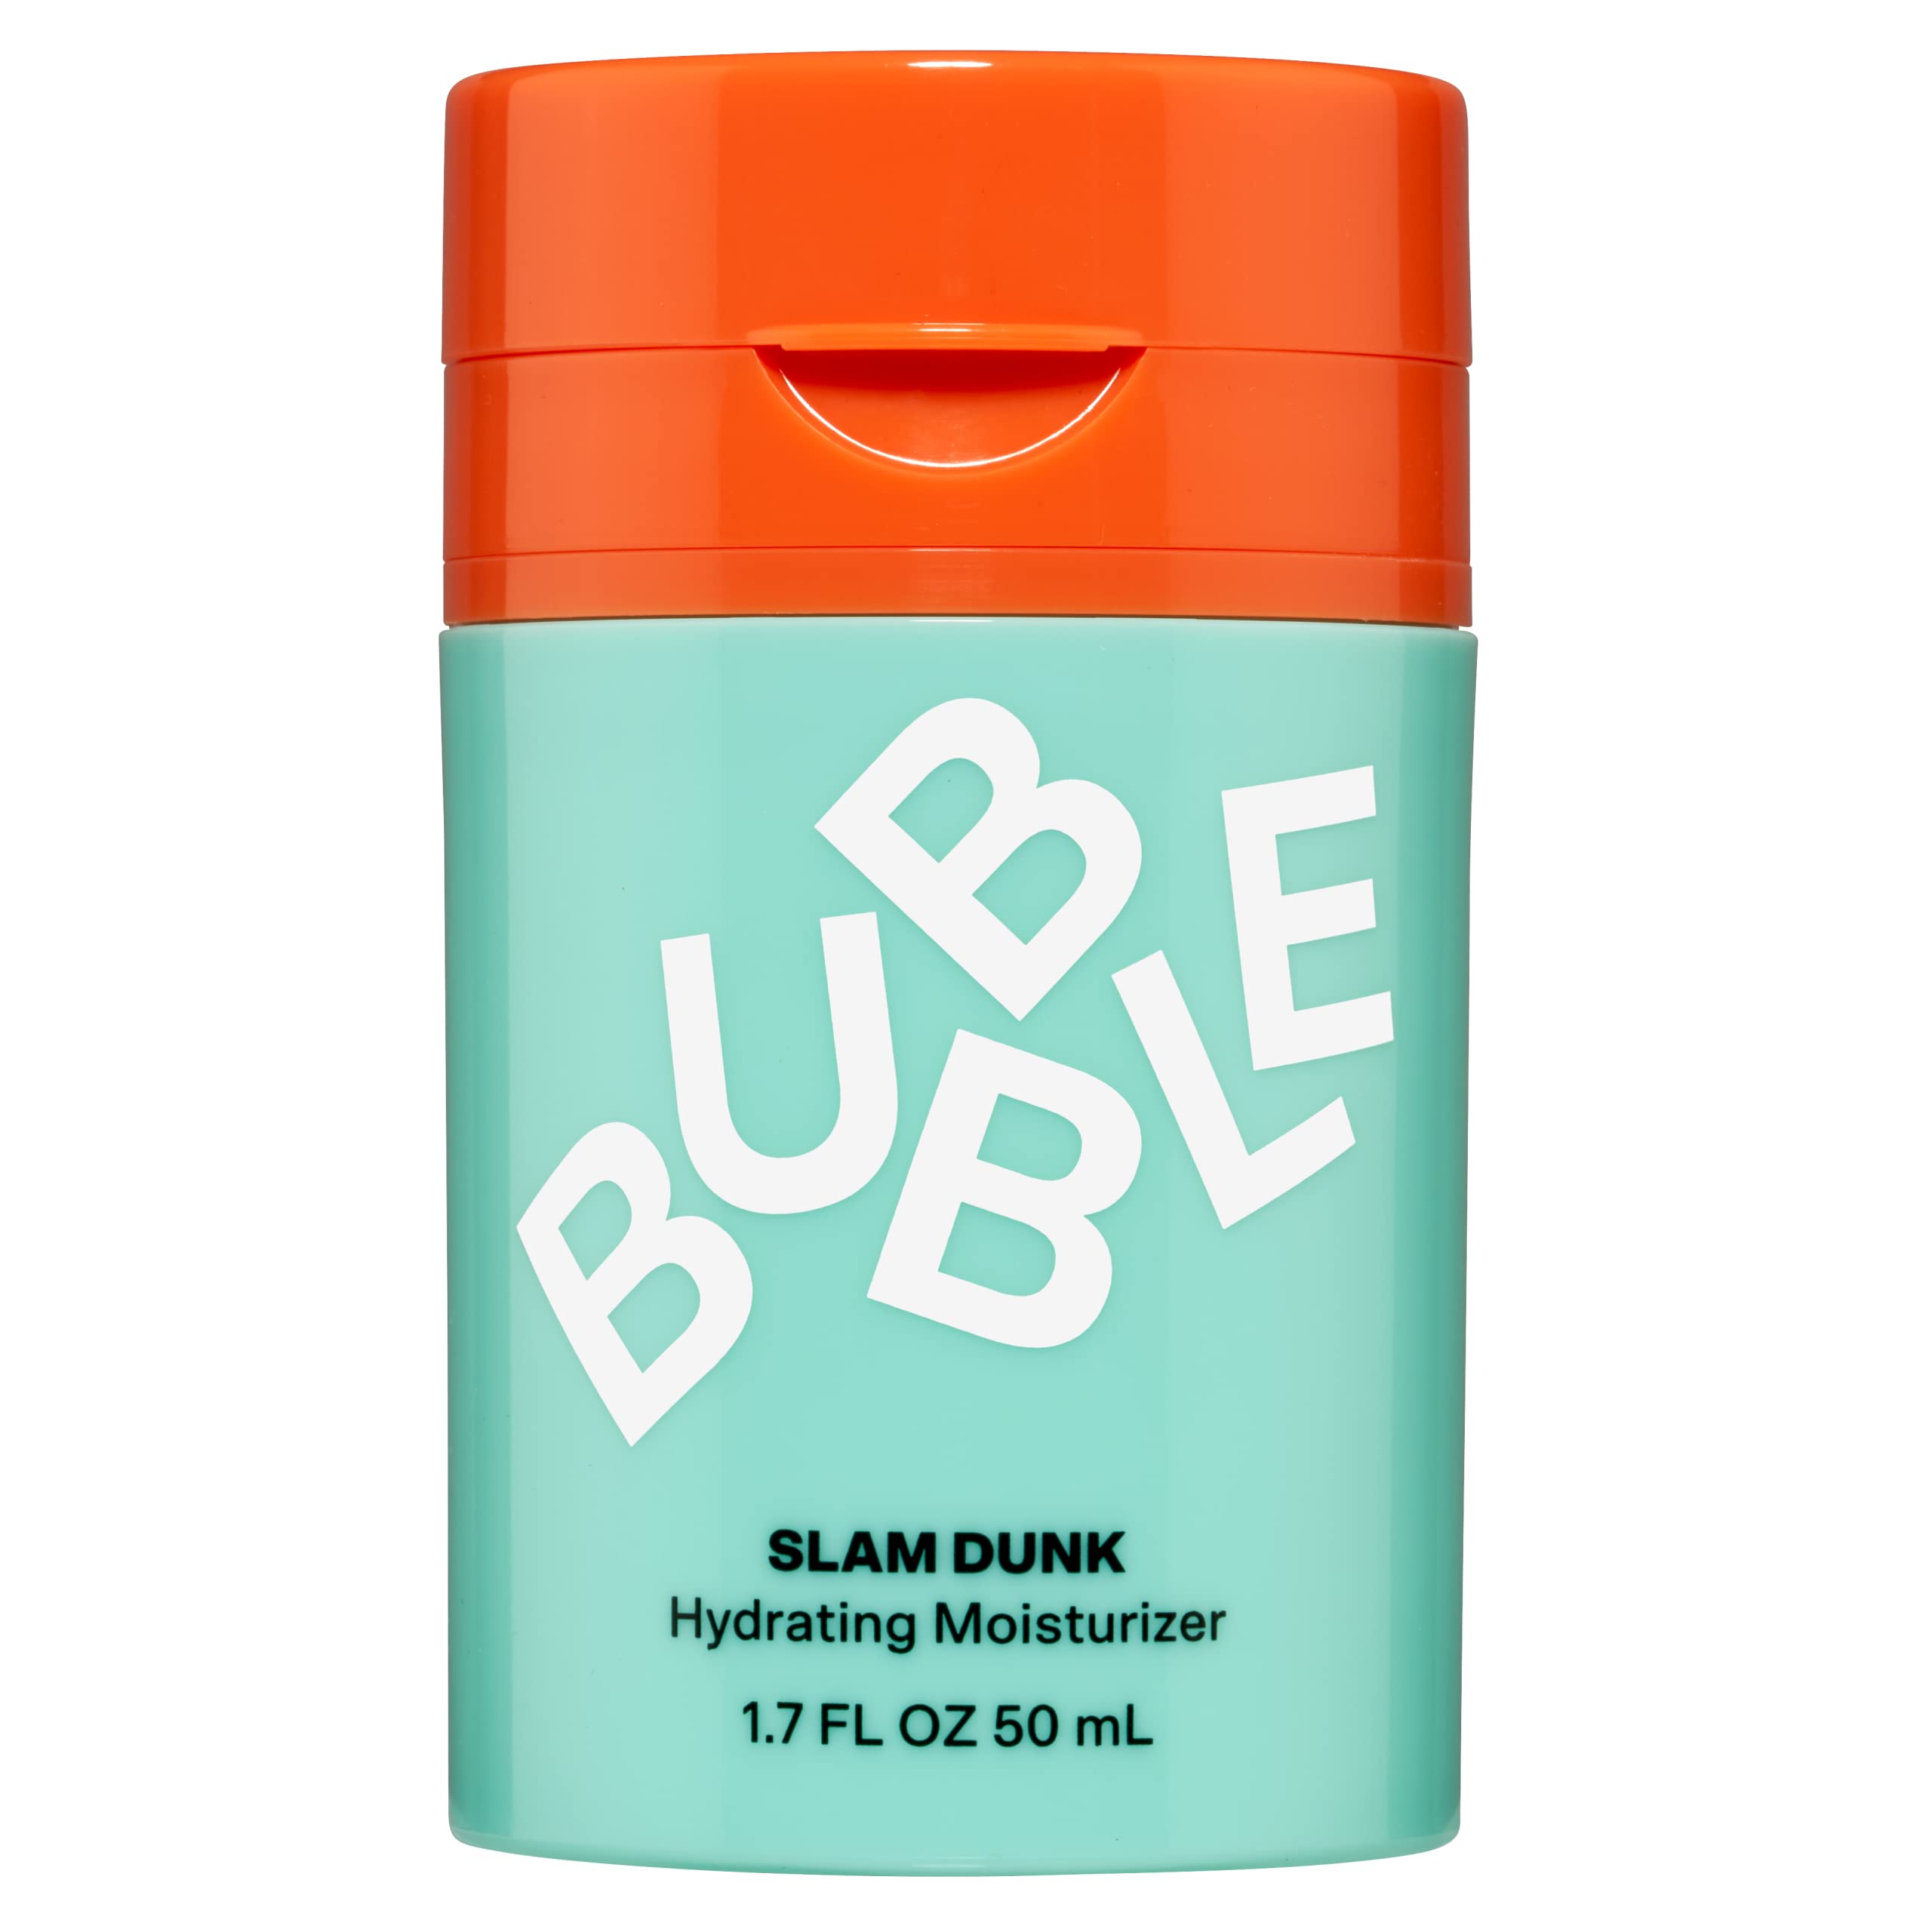 Bubble Skincare Slam Dunk Hydrating Facial Moisturizer - Natural Aloe Juice + Avocado Oil for Skin Hydration and Blue Light Protection - Daily Face Moisturizer for Sensitive Skin (50ml)